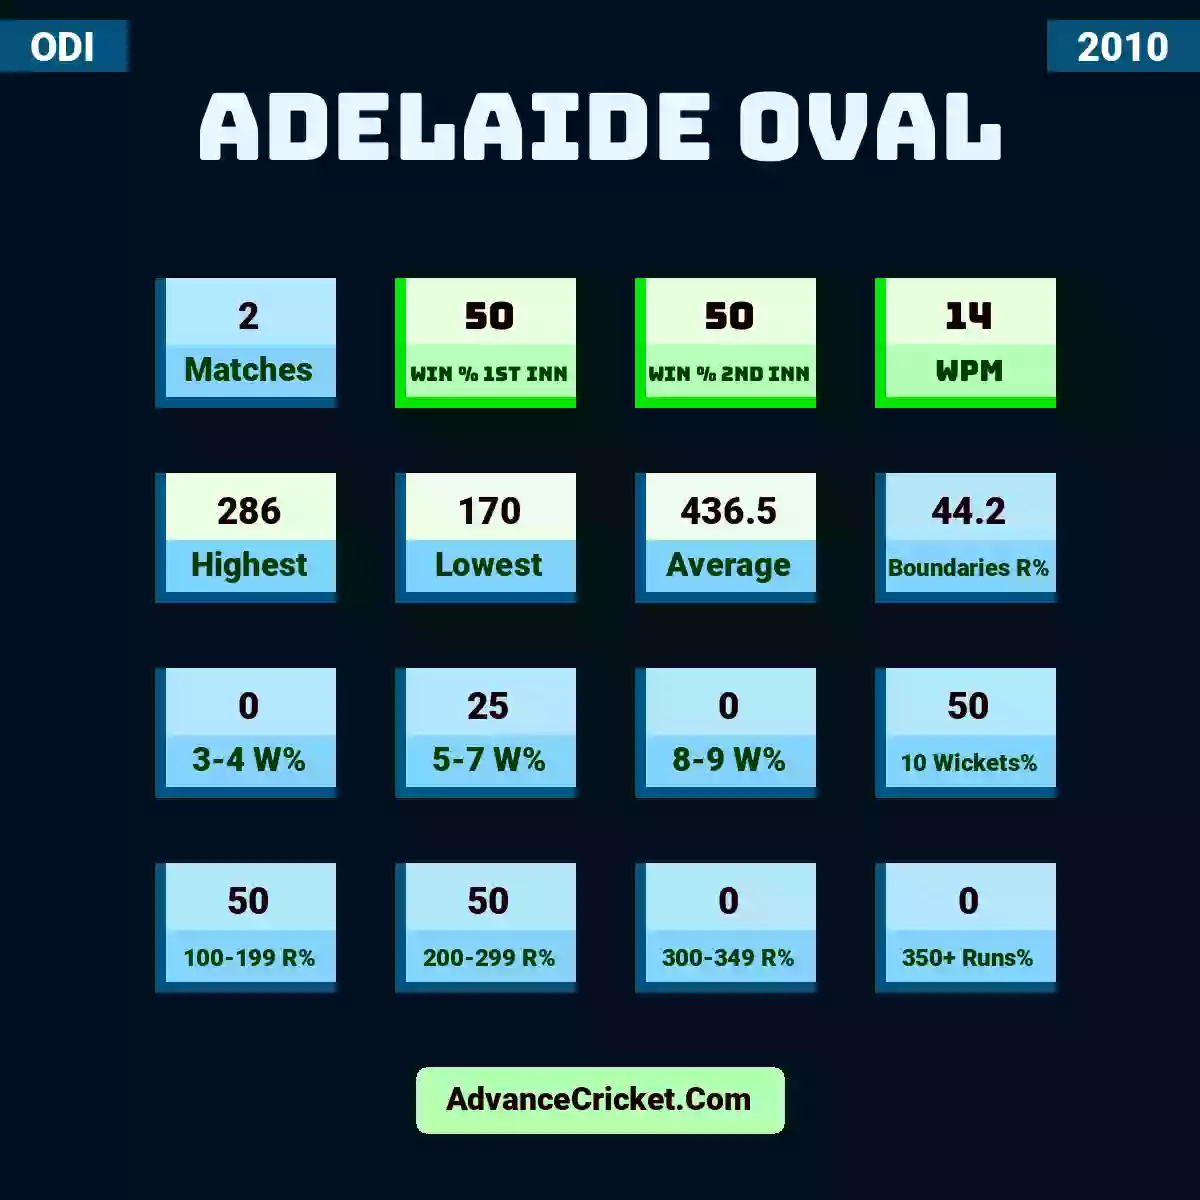 Image showing Adelaide Oval with Matches: 2, Win % 1st Inn: 50, Win % 2nd Inn: 50, WPM: 14, Highest: 286, Lowest: 170, Average: 436.5, Boundaries R%: 44.2, 3-4 W%: 0, 5-7 W%: 25, 8-9 W%: 0, 10 Wickets%: 50, 100-199 R%: 50, 200-299 R%: 50, 300-349 R%: 0, 350+ Runs%: 0.